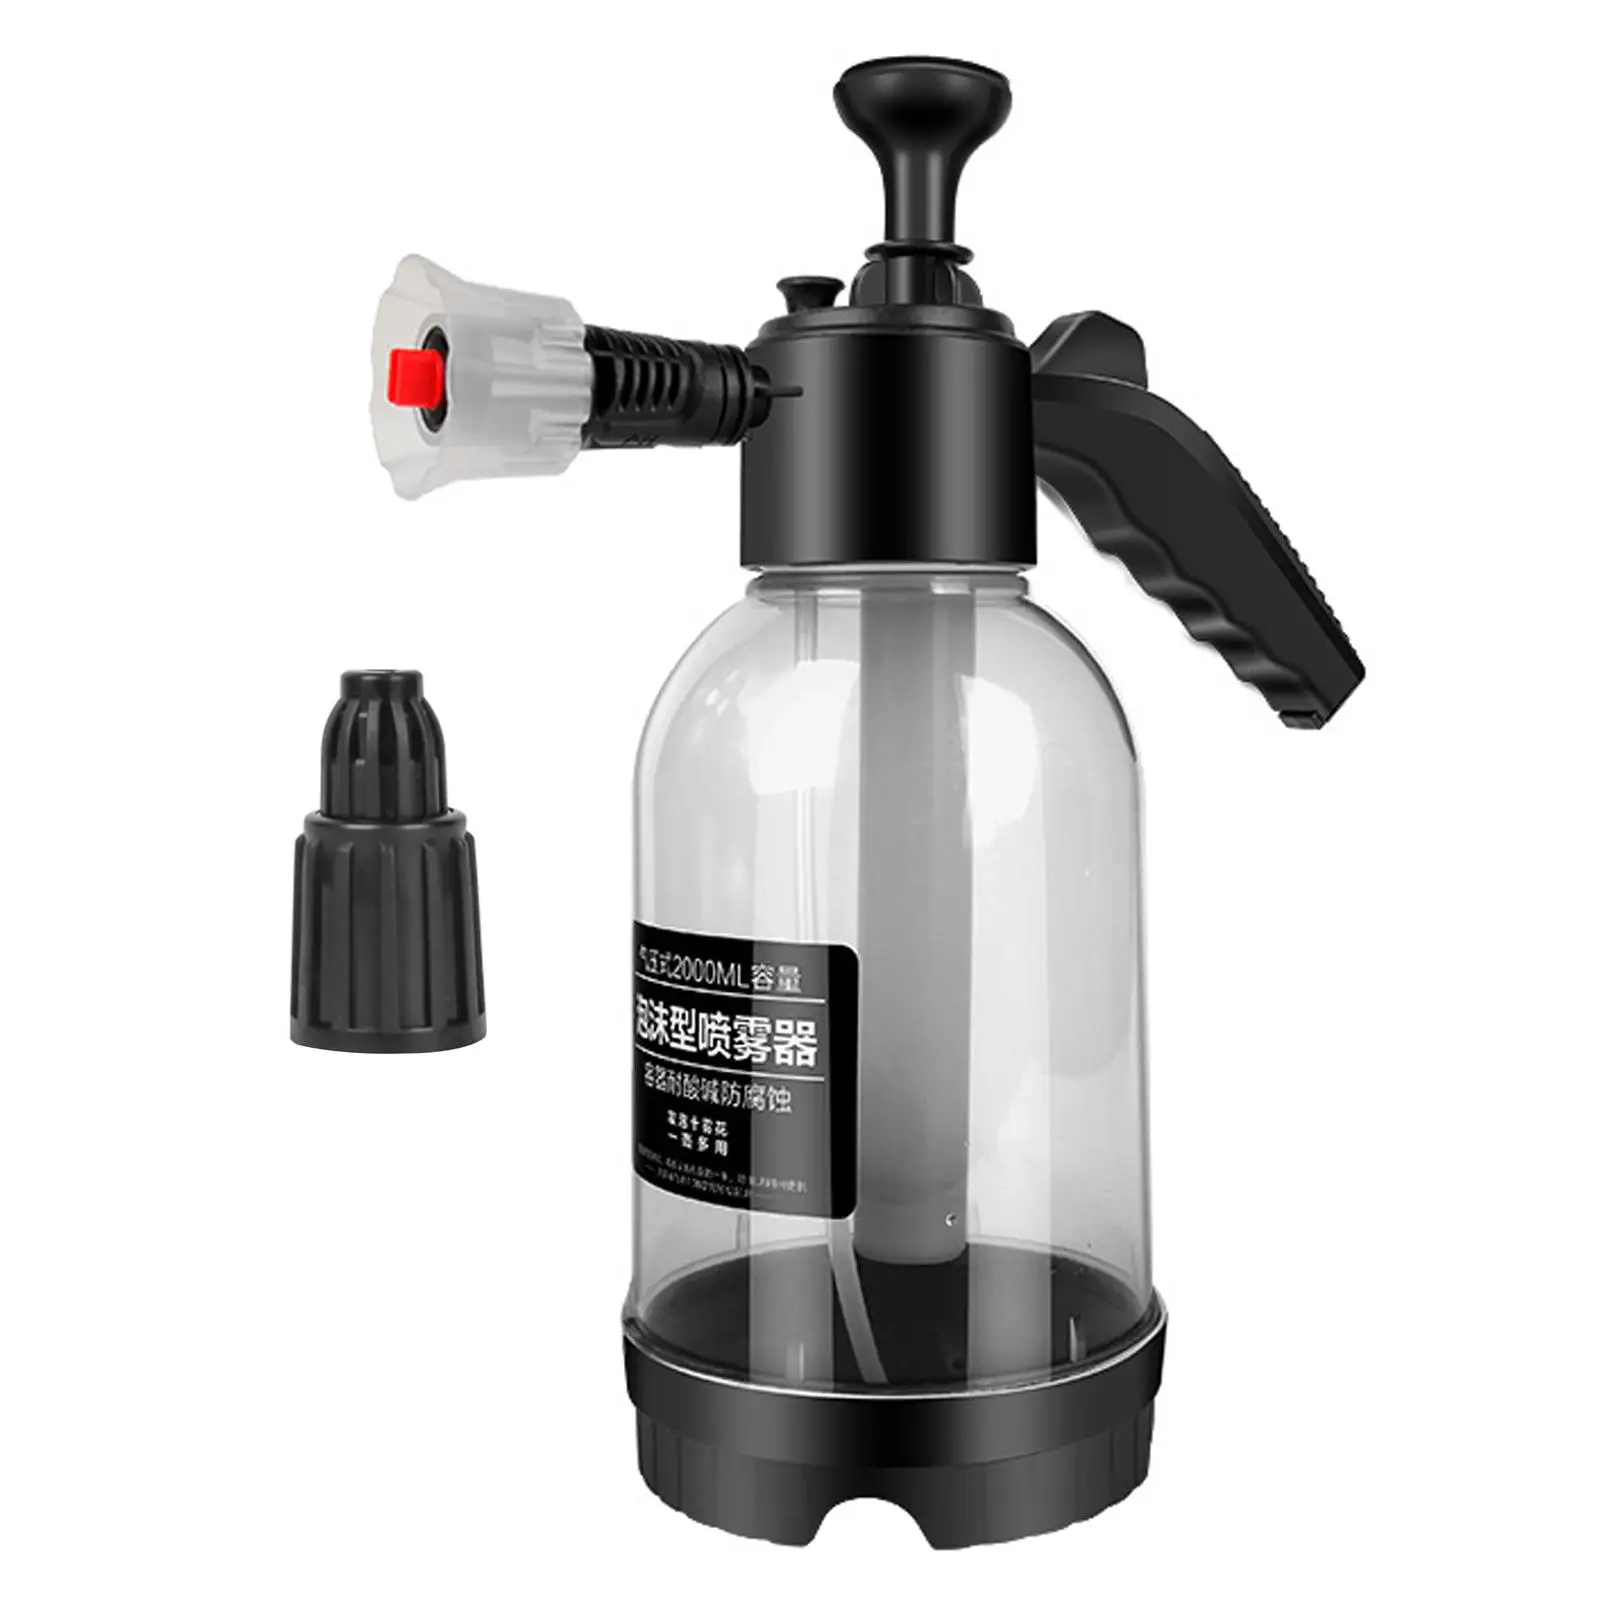 Portable Car Wash Foam Sprayer 2L Multifunction Hand for house Cleaning